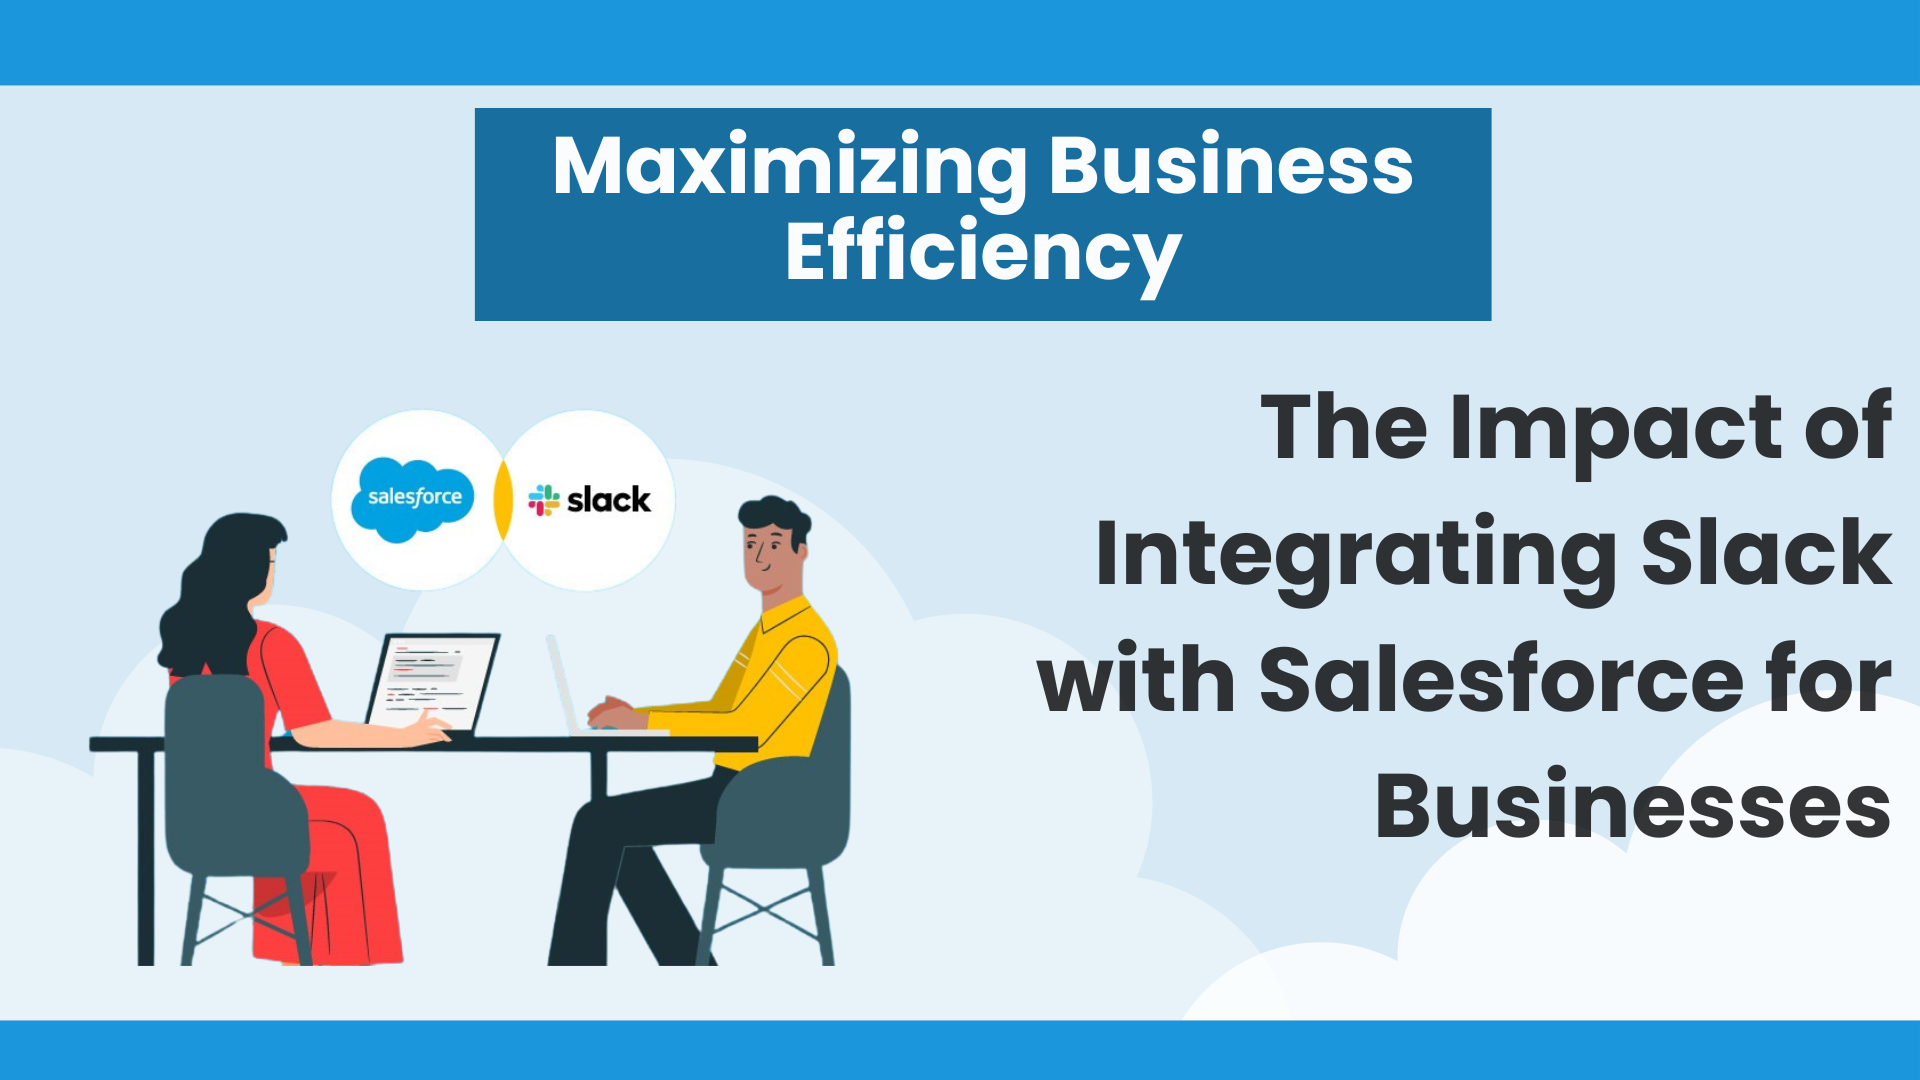 Maximizing Business Efficiency: The Impact of Integrating Slack with Salesforce for Businesses